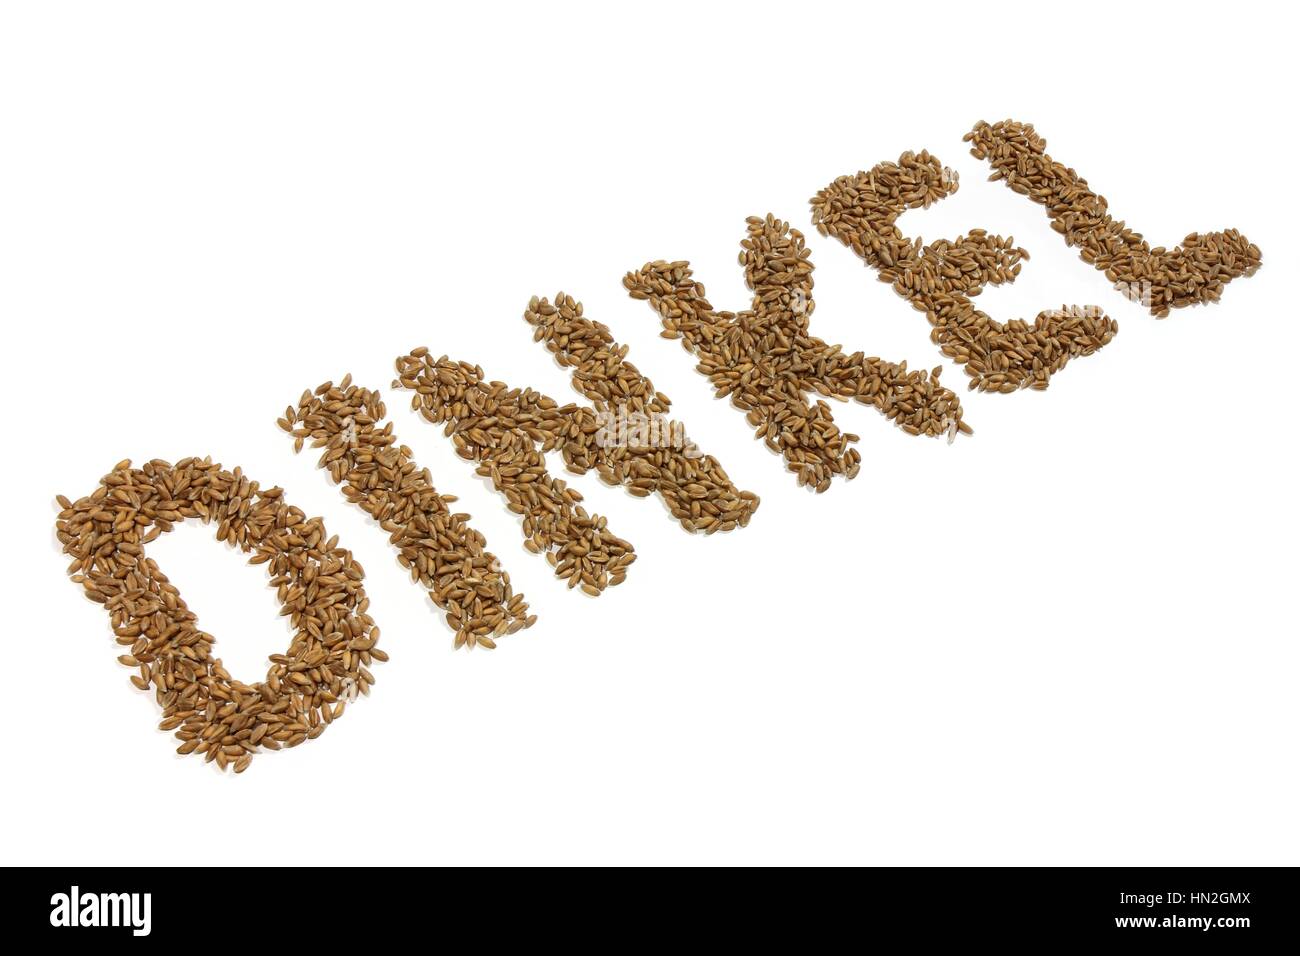 DINKEL (spelt in German language) written with spelt grains isolated on white background Stock Photo